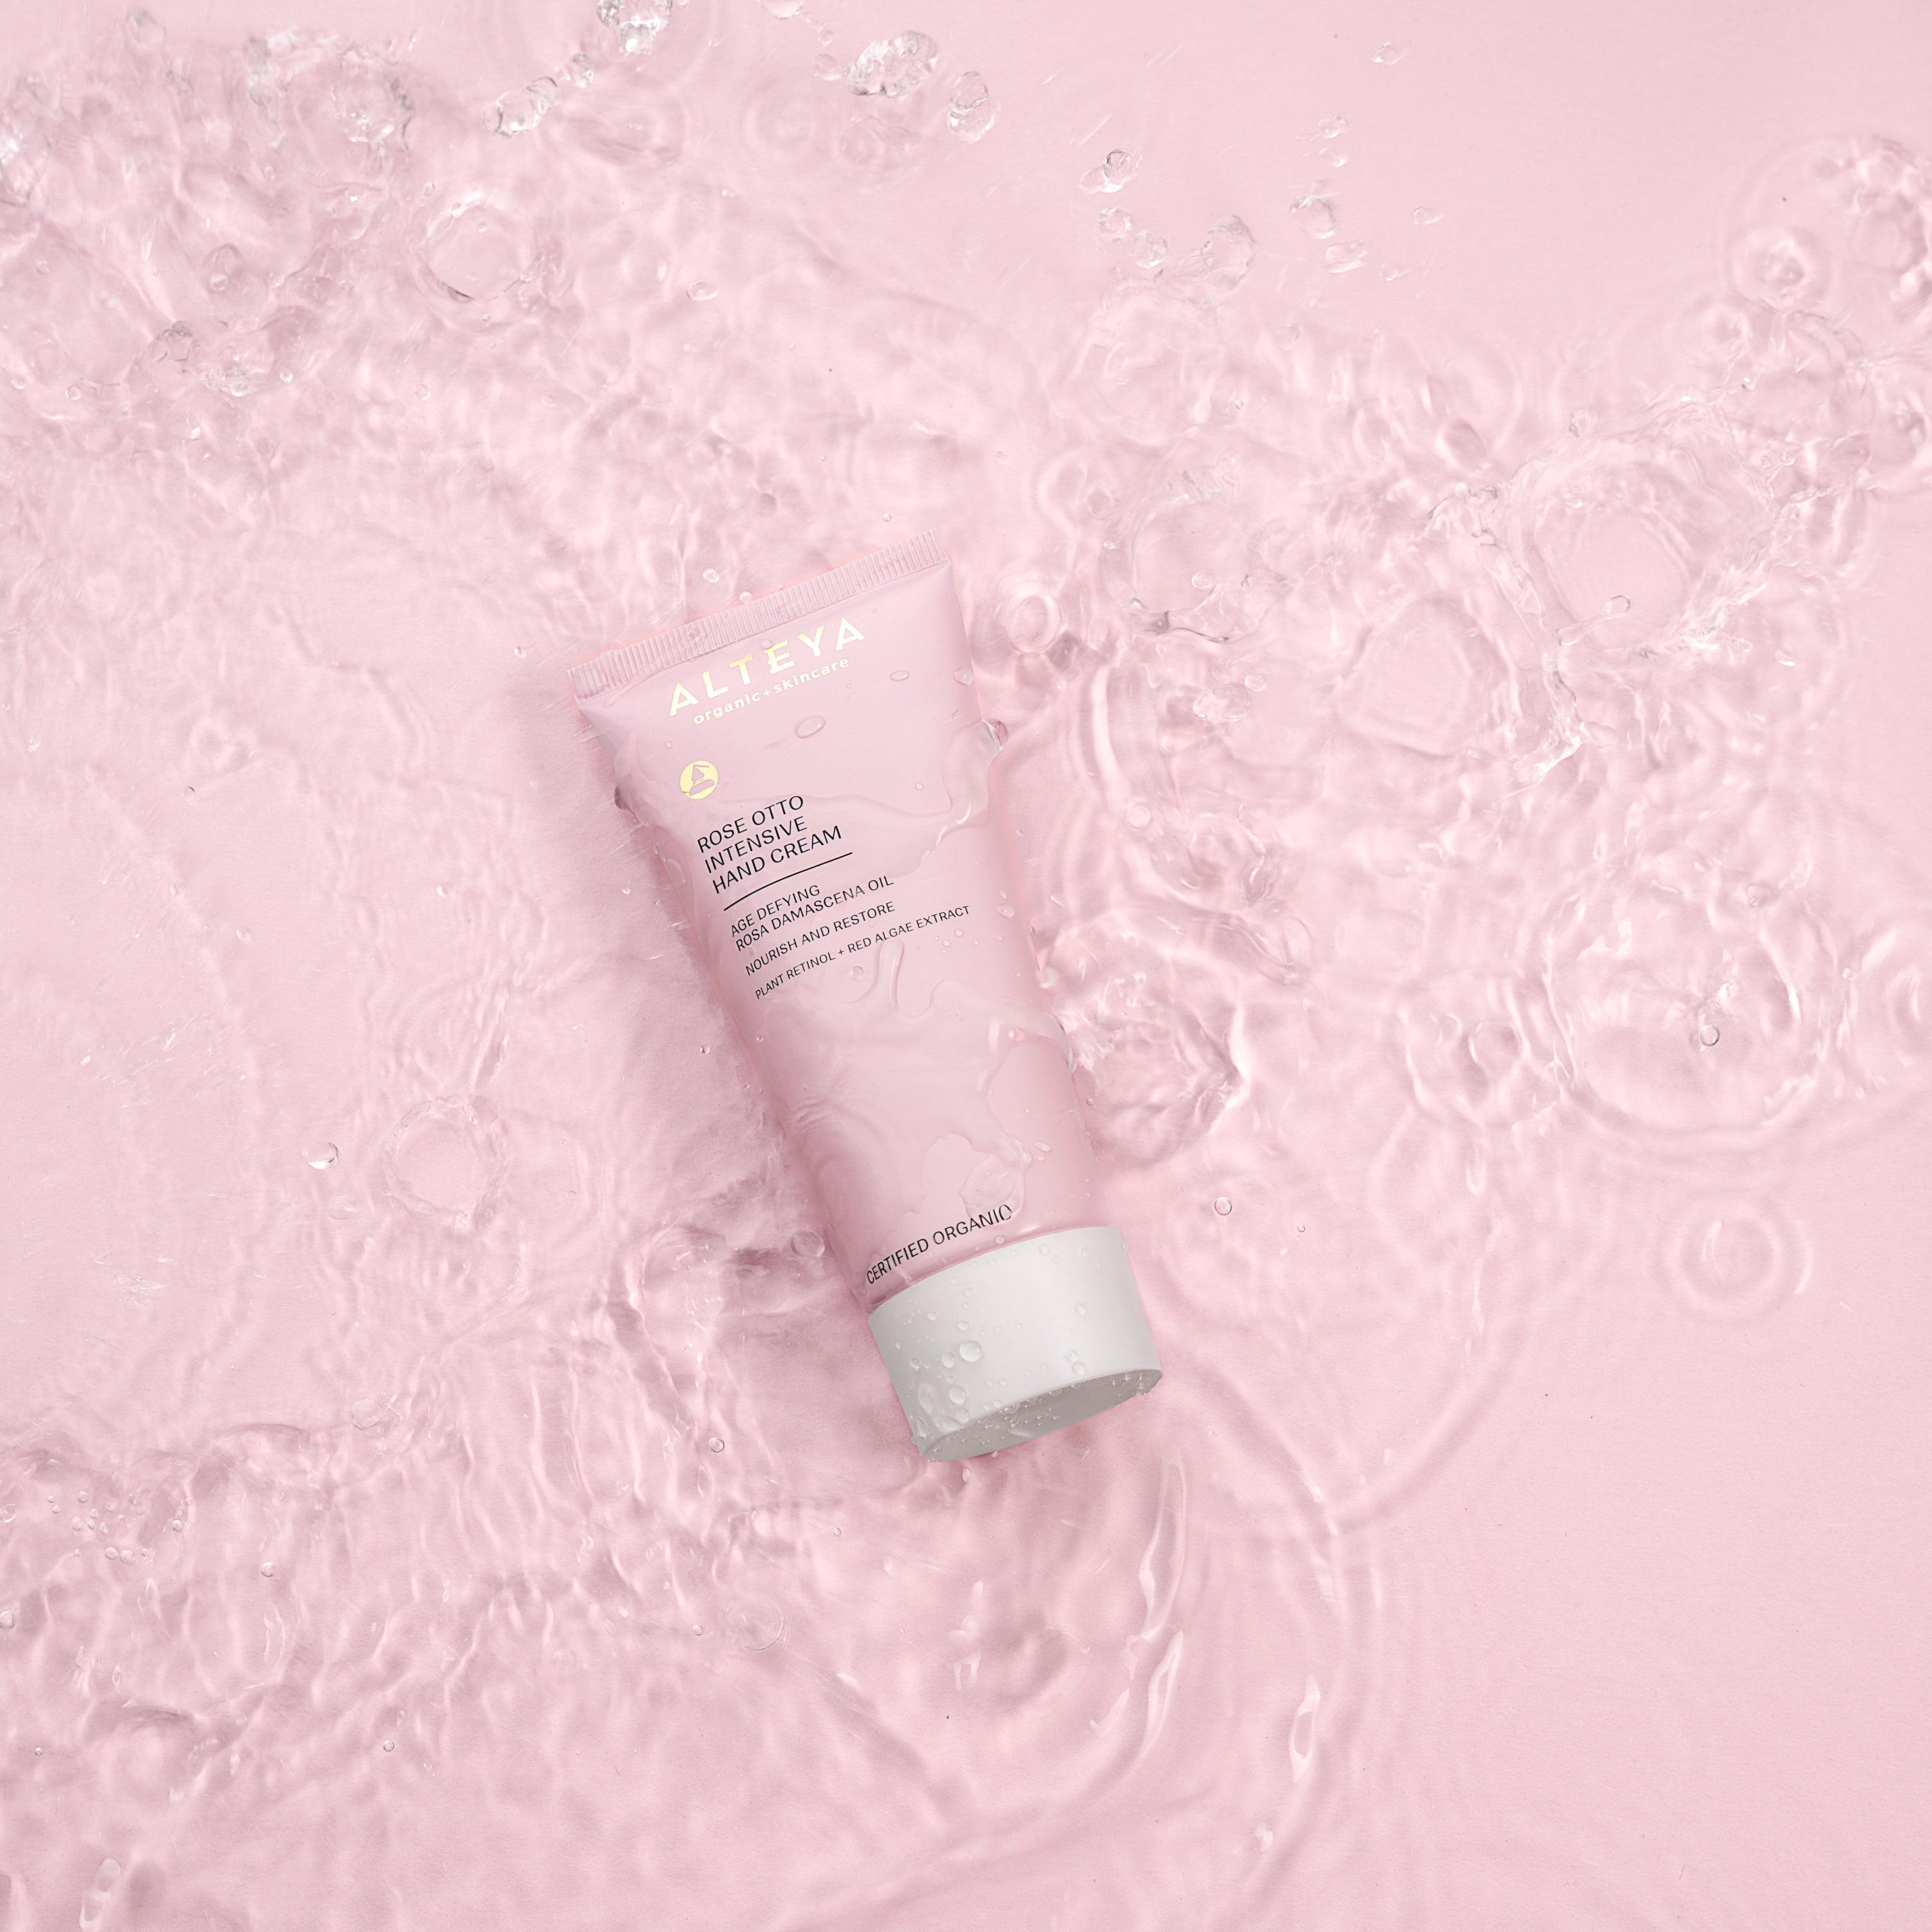 A pink tube of Alteya Organics Organic Rose Otto Intensive Hand Cream, sitting on top of a pink background.